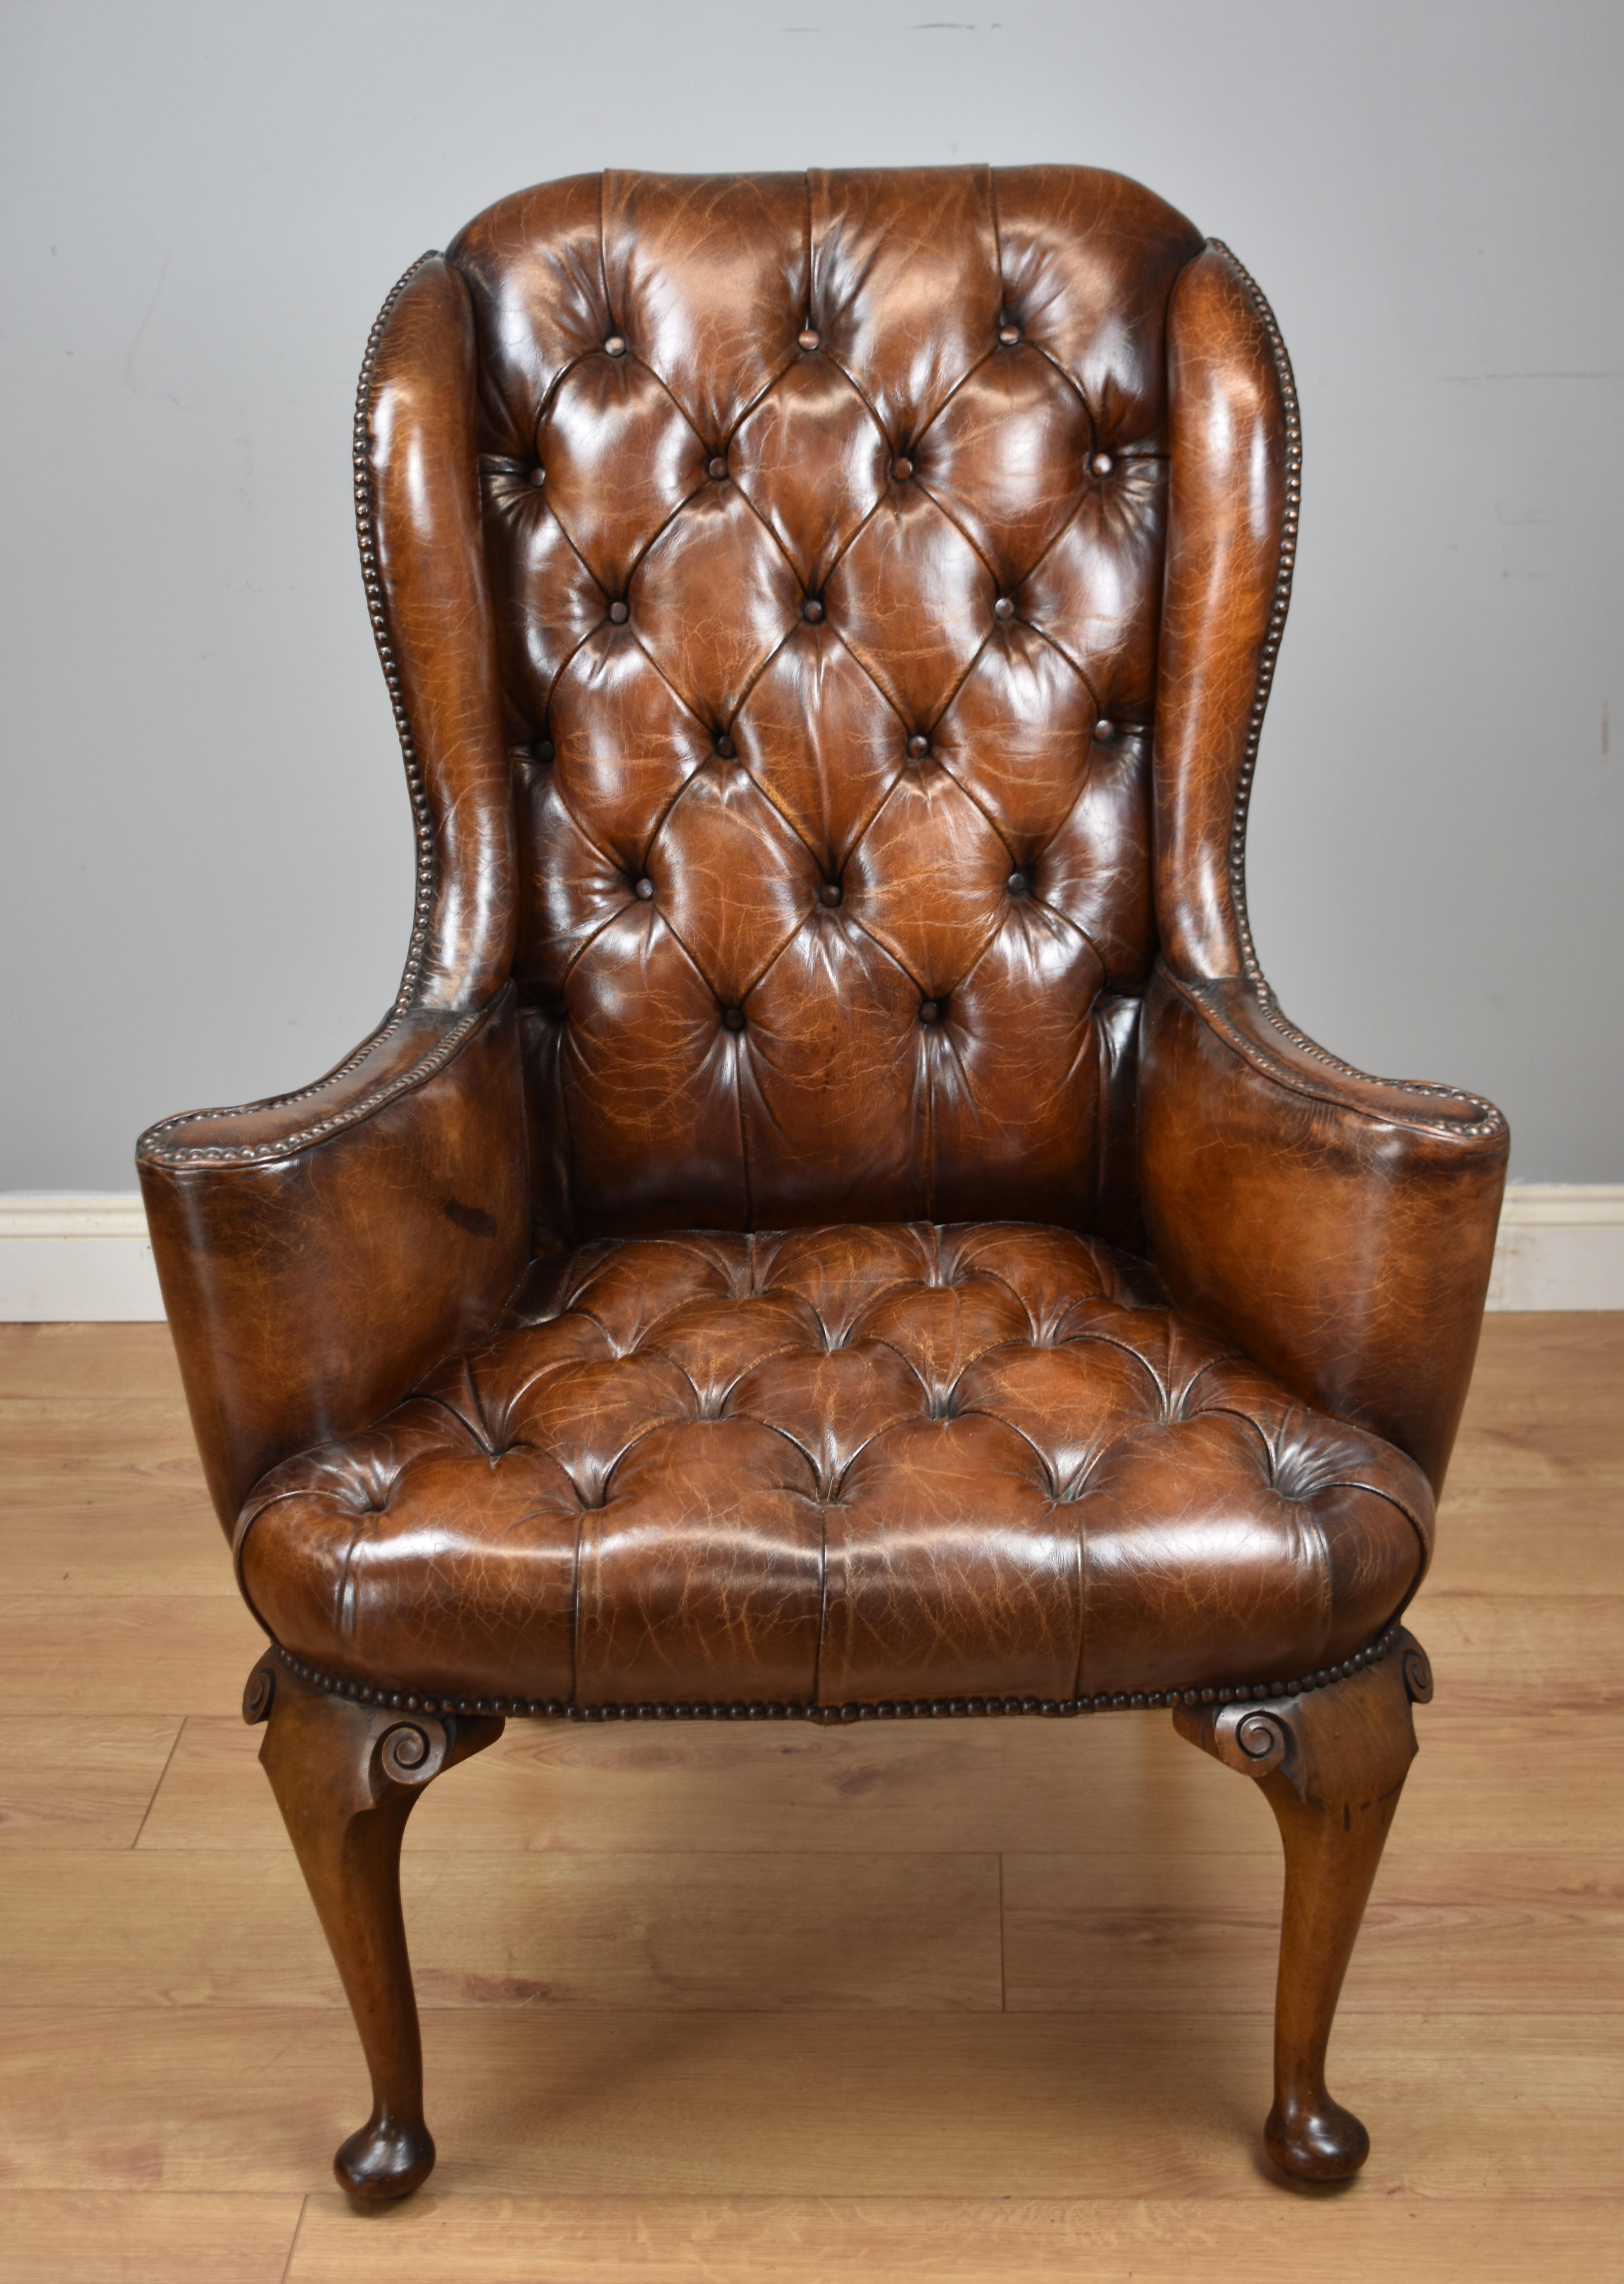 For sale is a fine quality Early 20th century hand dyed distressed brown English leather wingback armchair of small proportions. The chair has a deep buttoned back flanked by two wings, above a deep buttoned seat, with two scrolled arms. The chair